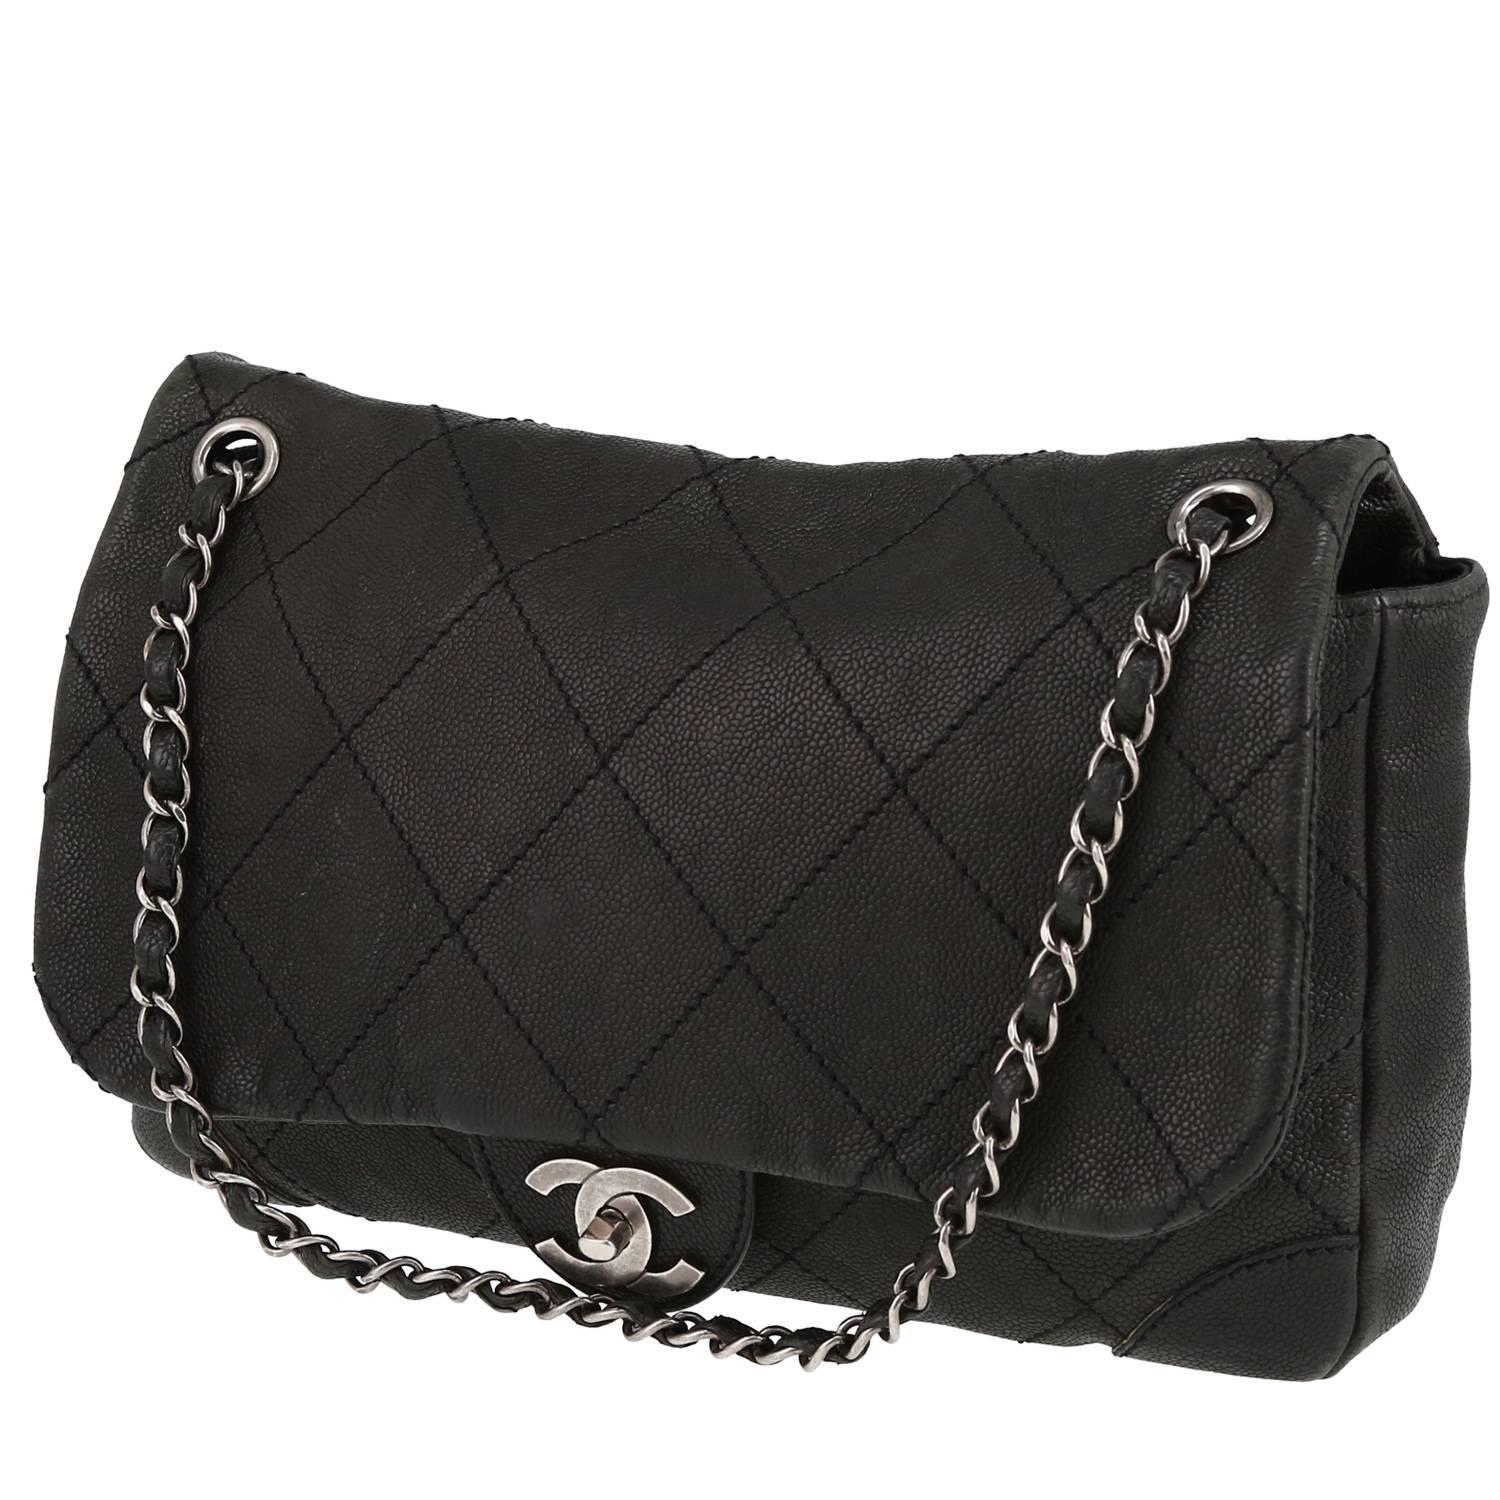 CHANEL COCO PLEATS BLACK QUILTED CALFSKIN LEATHER